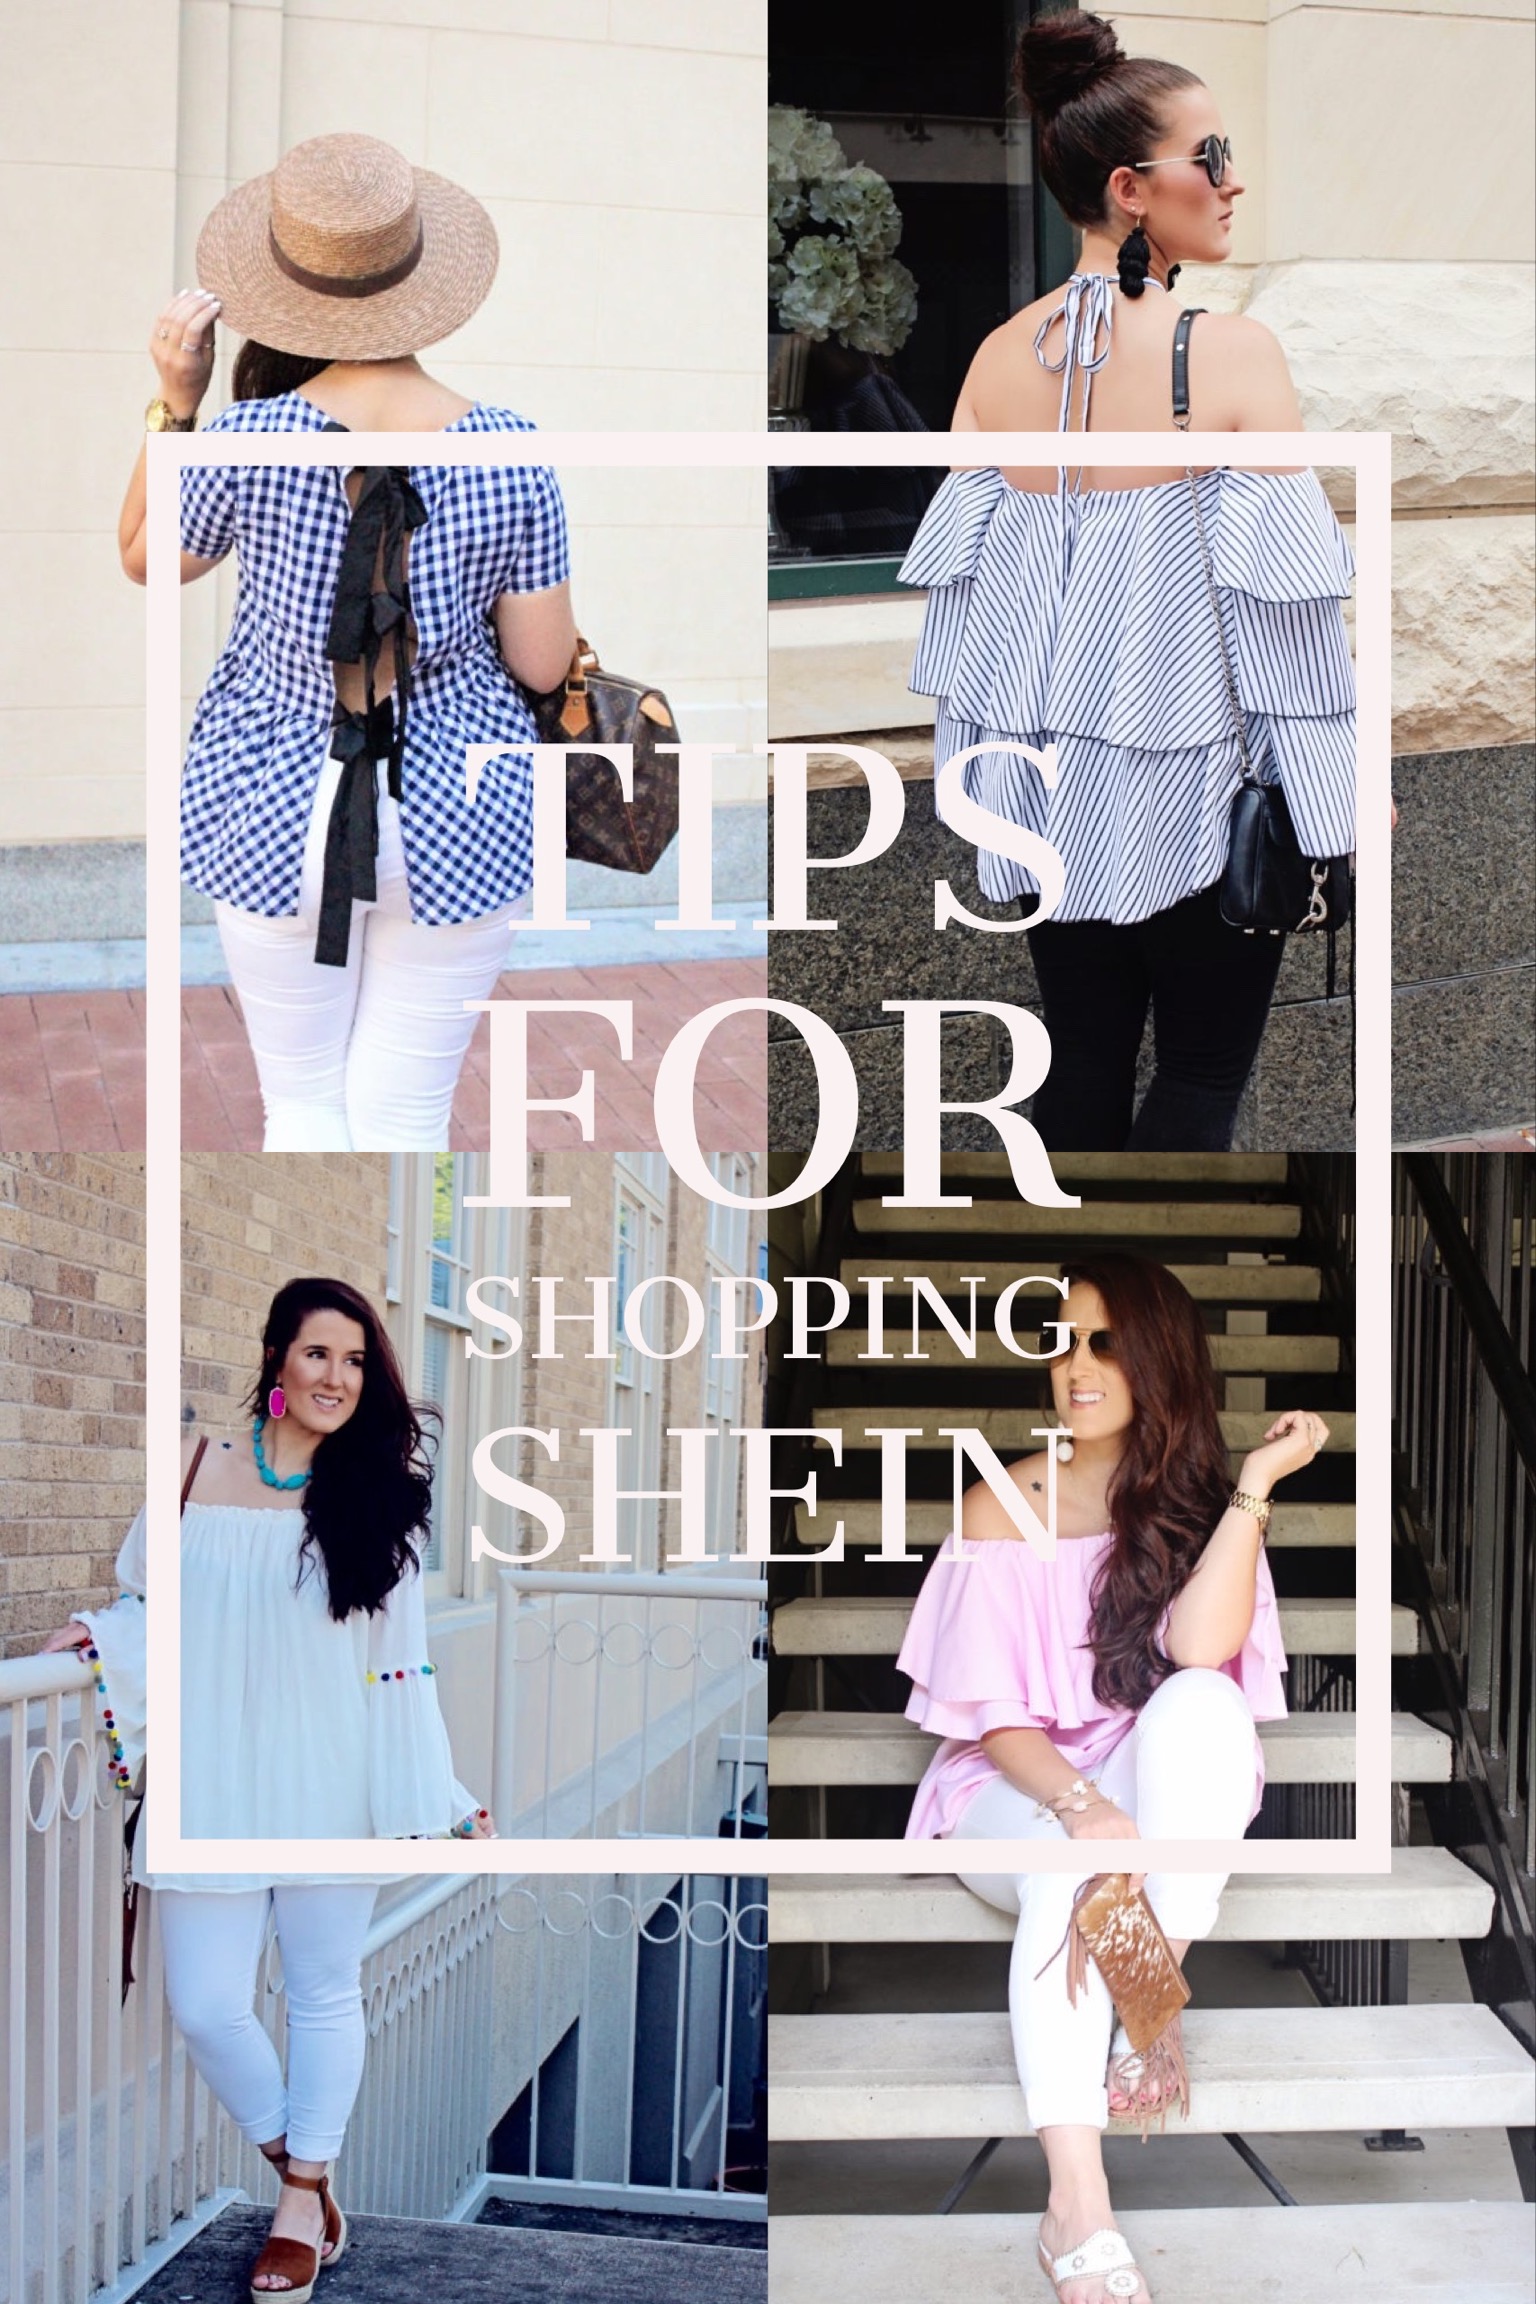 The Best Shein Shopping Tips - Including Free Clothes!